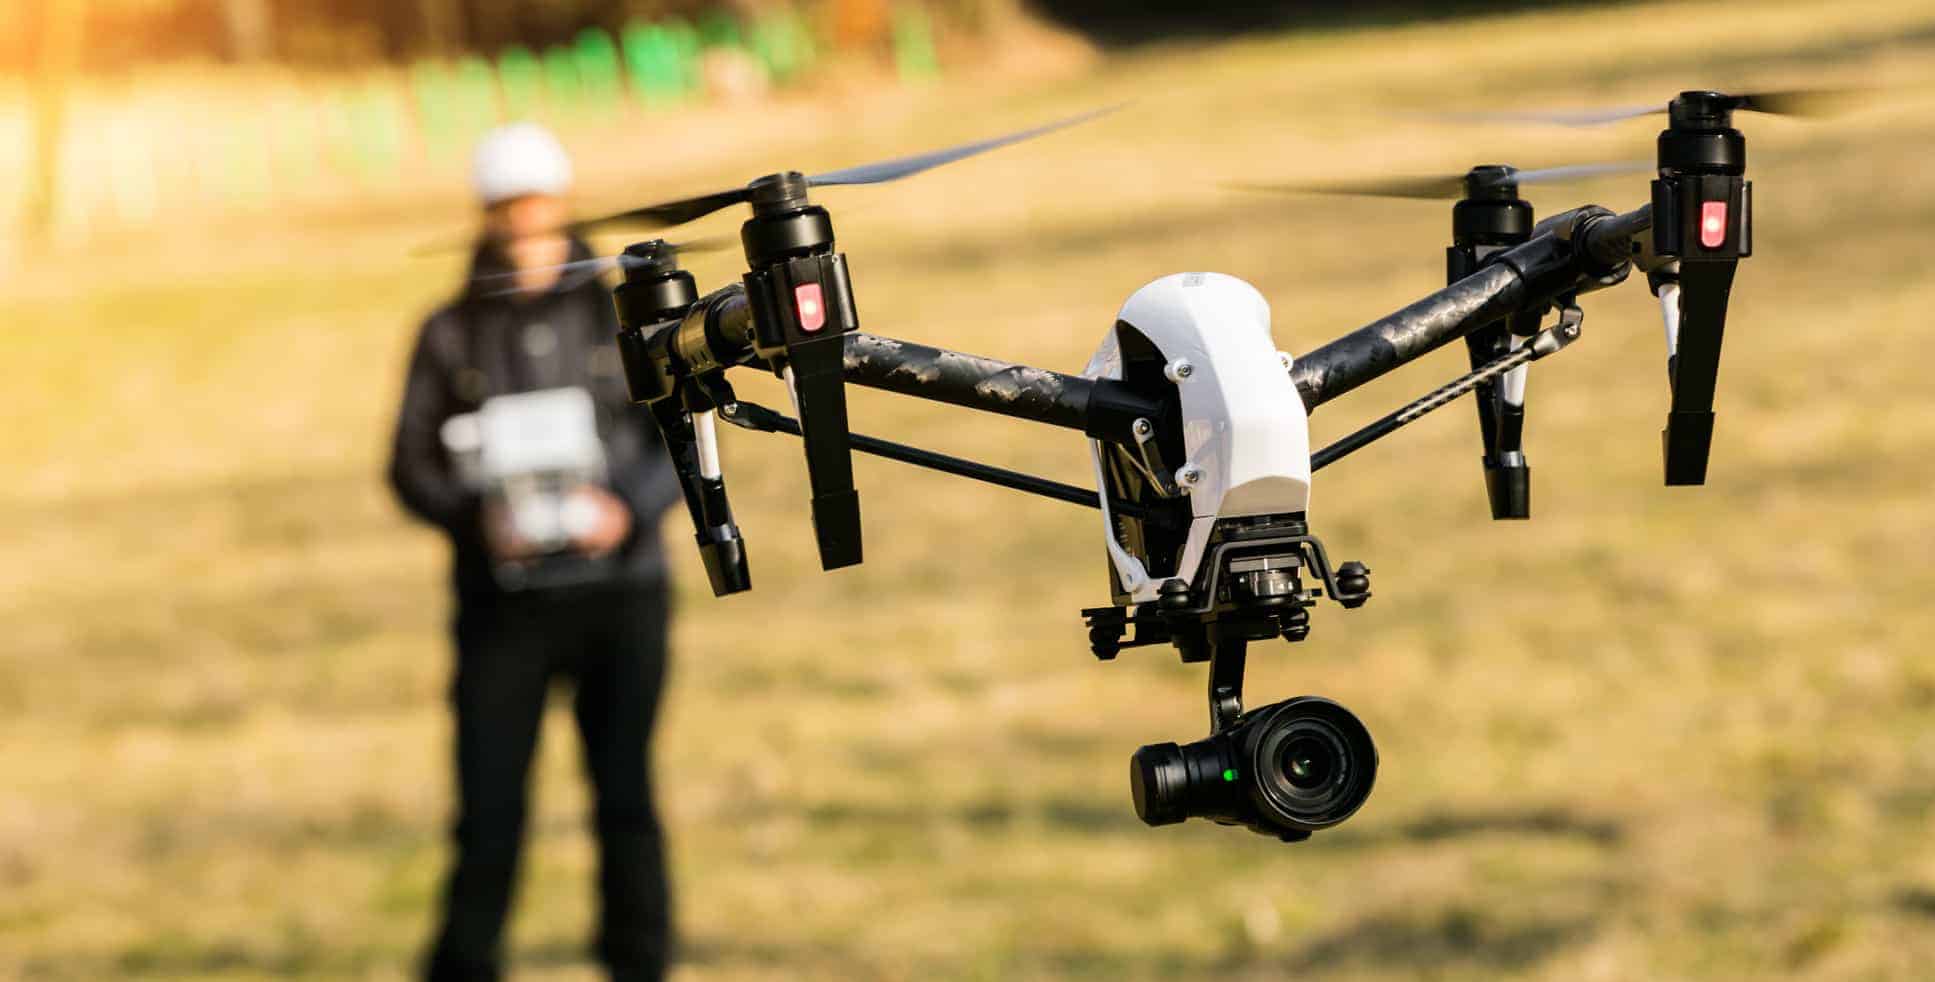 5 Innovative Ways to Use Drones in Marketing